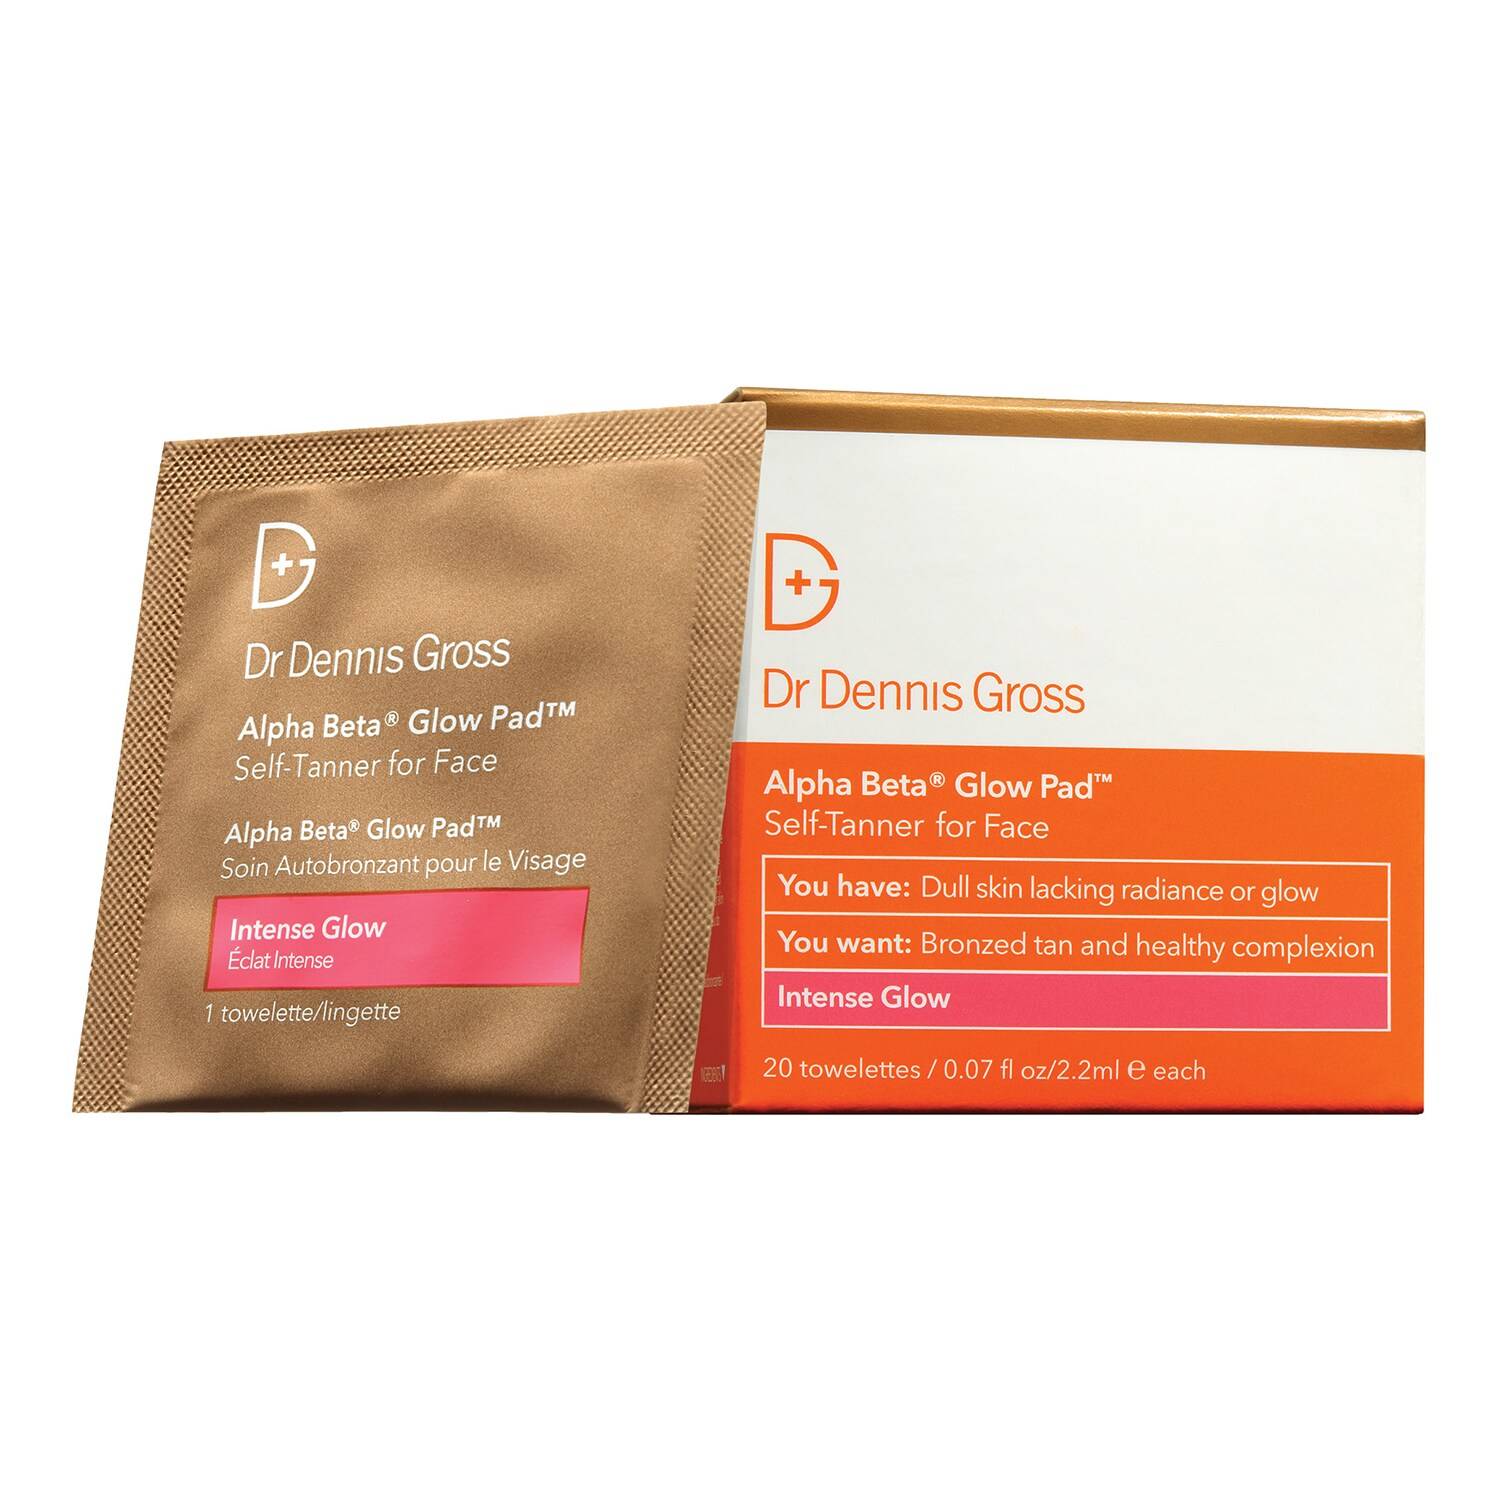 Dr Dennis Gross Alpha Beta� Glow Pad Self Tanner for Face Intense Glow 20 Applications